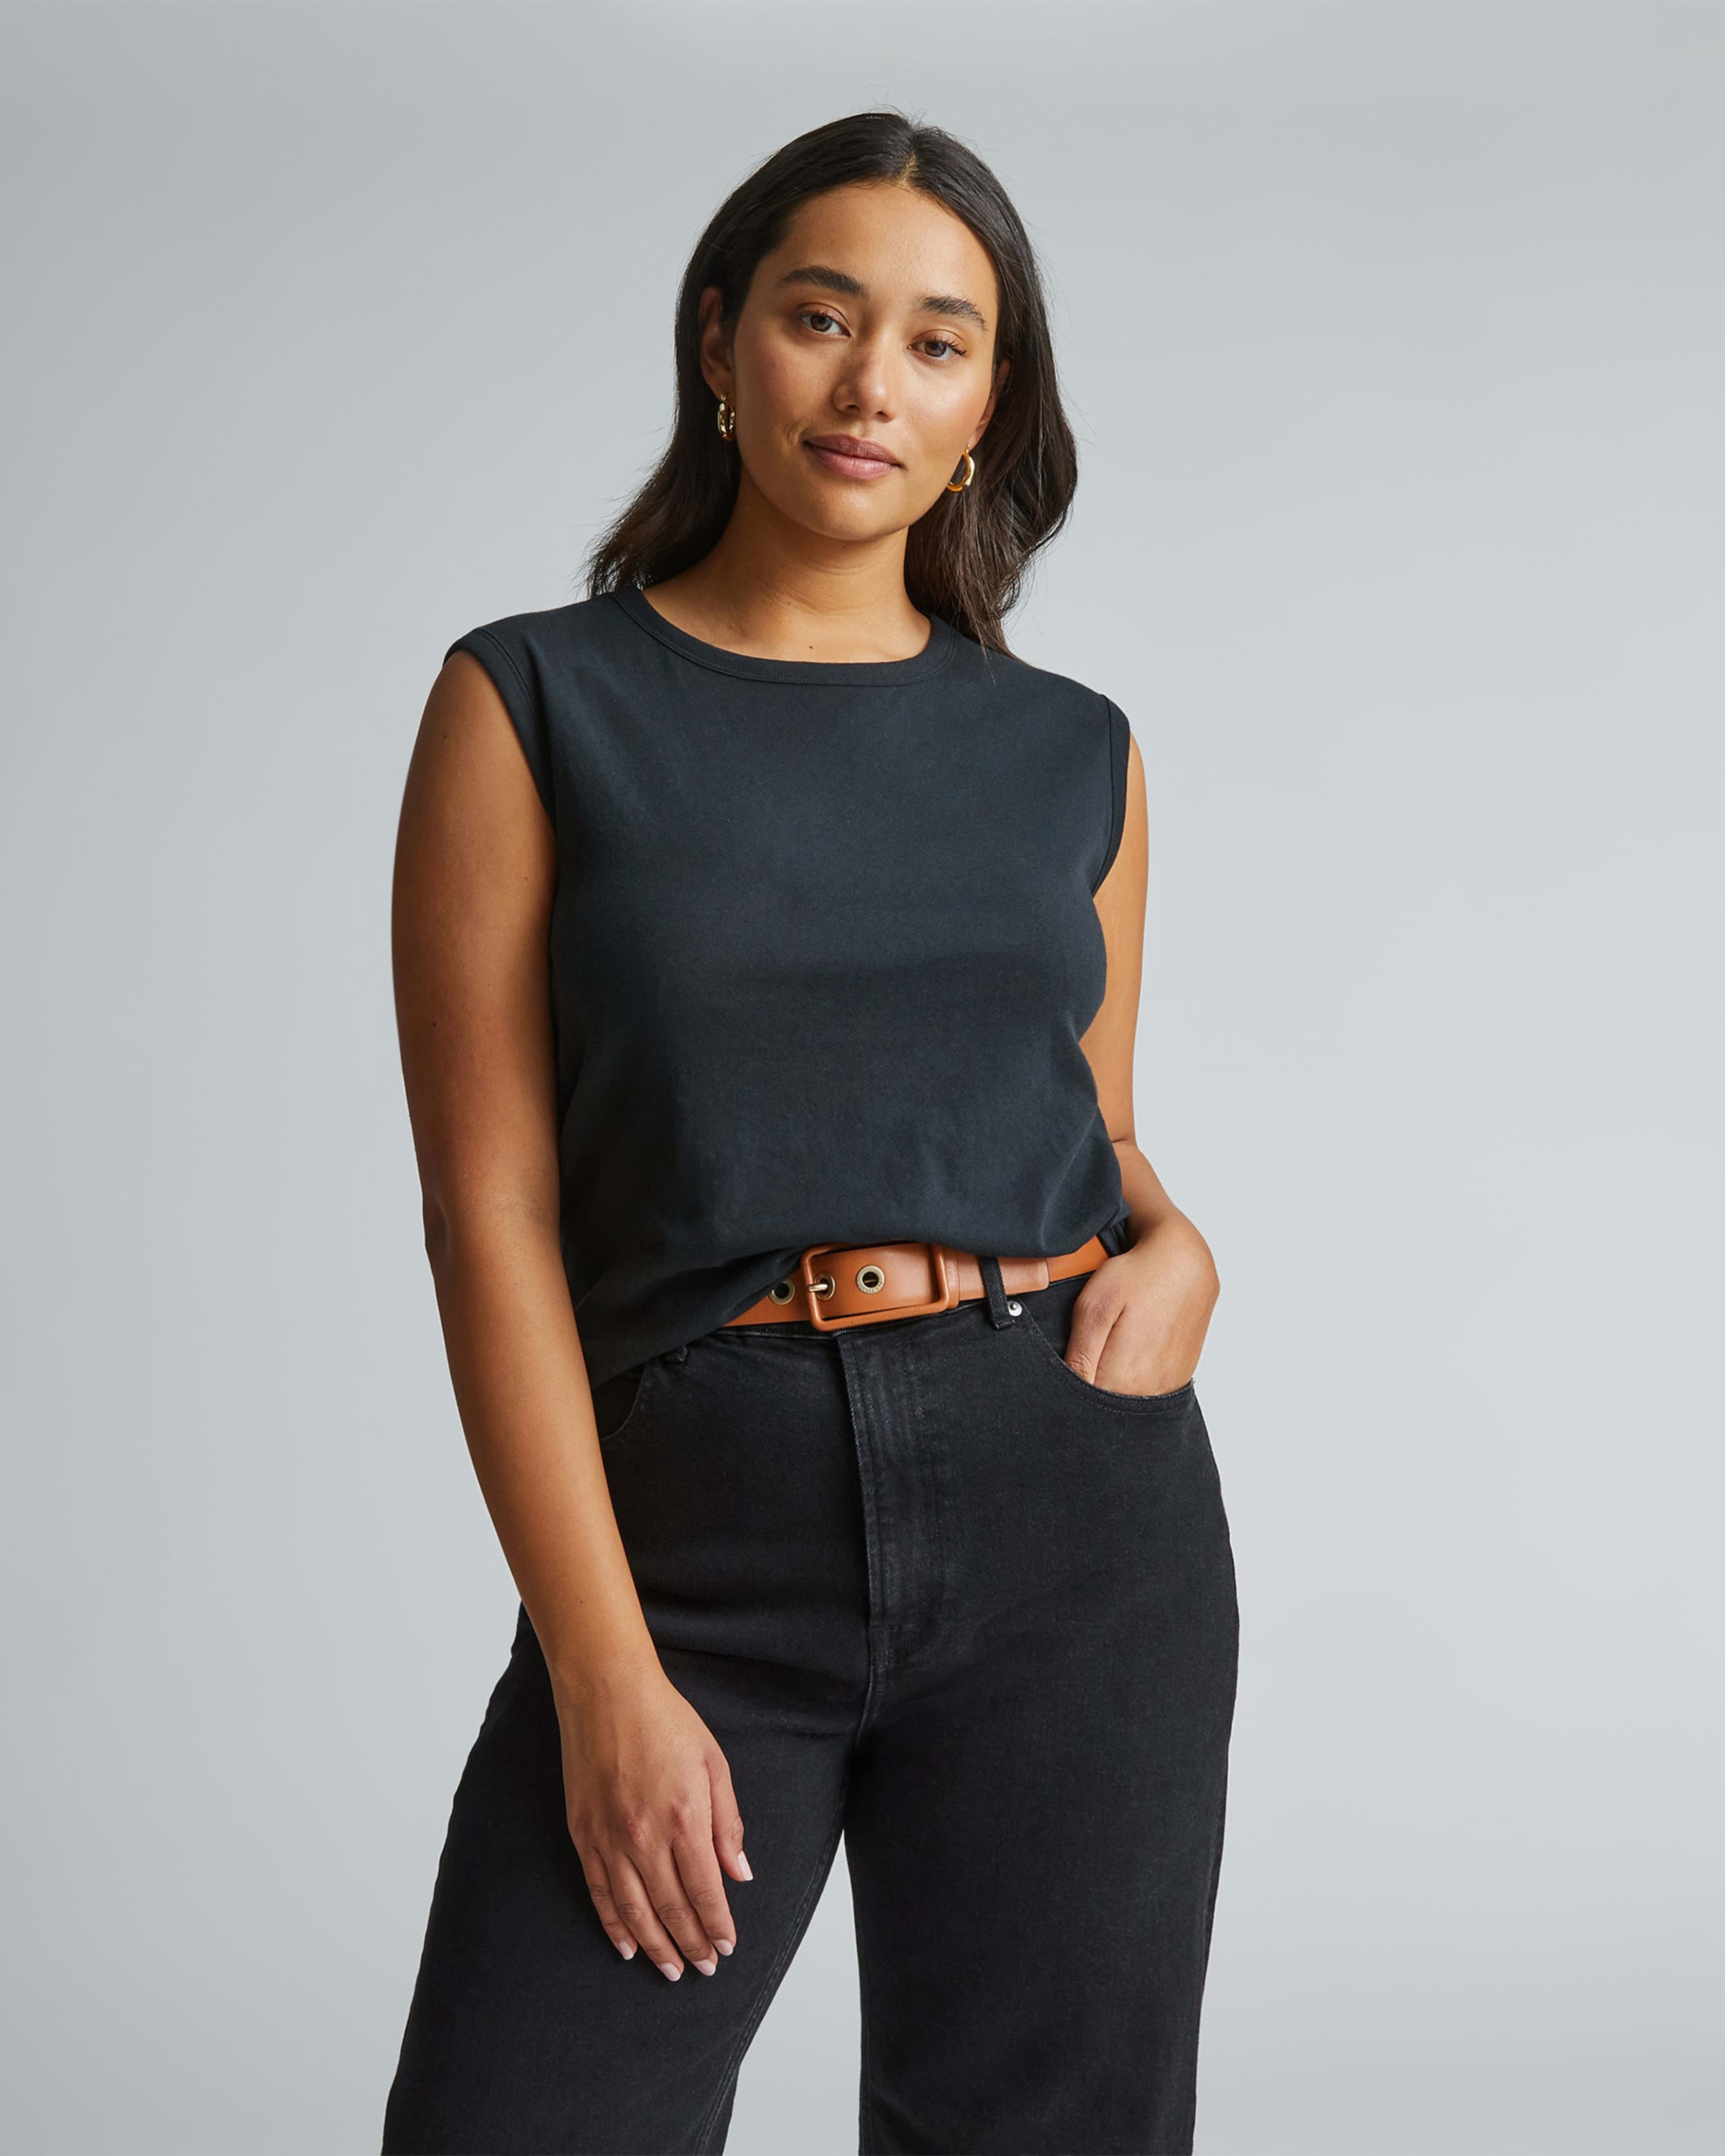 The Air Muscle Tank Black – Everlane